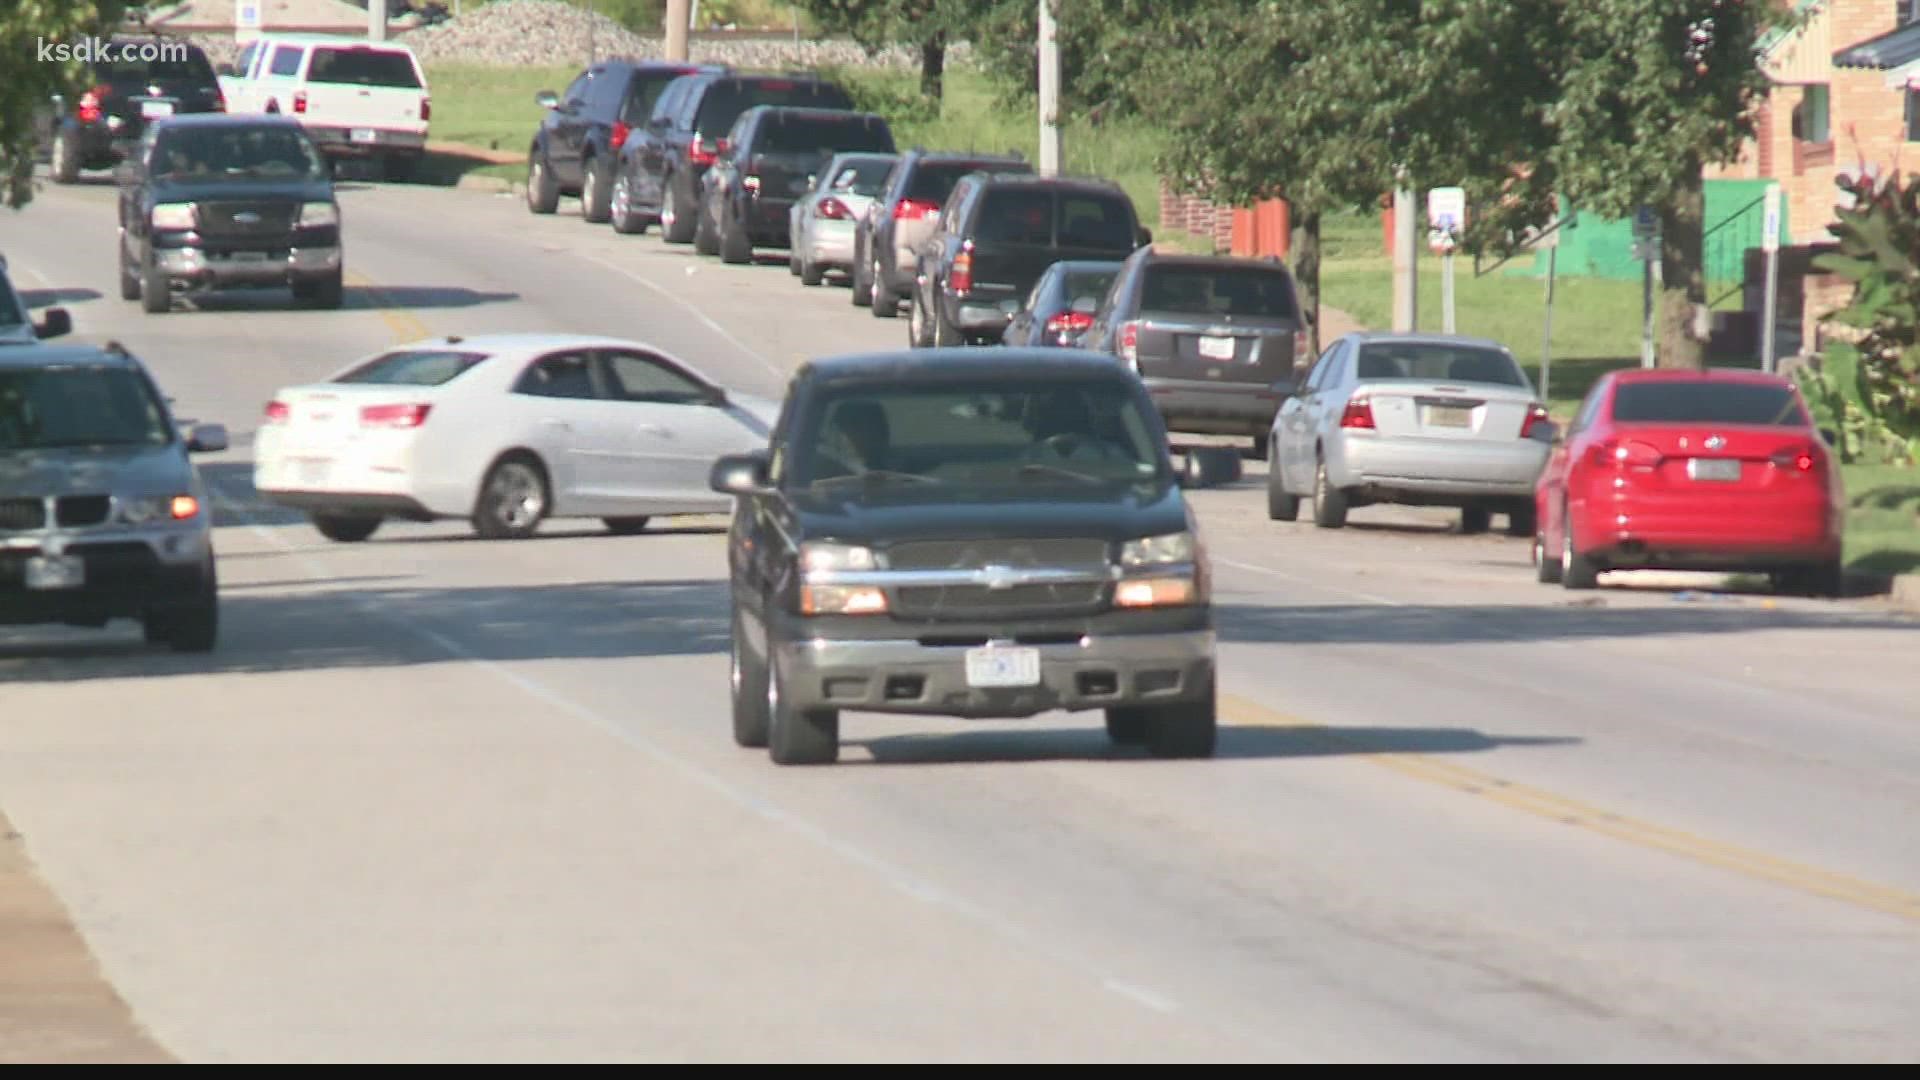 There have been 29 crashes along the stretch of Goodfellow Blvd. in the past year.